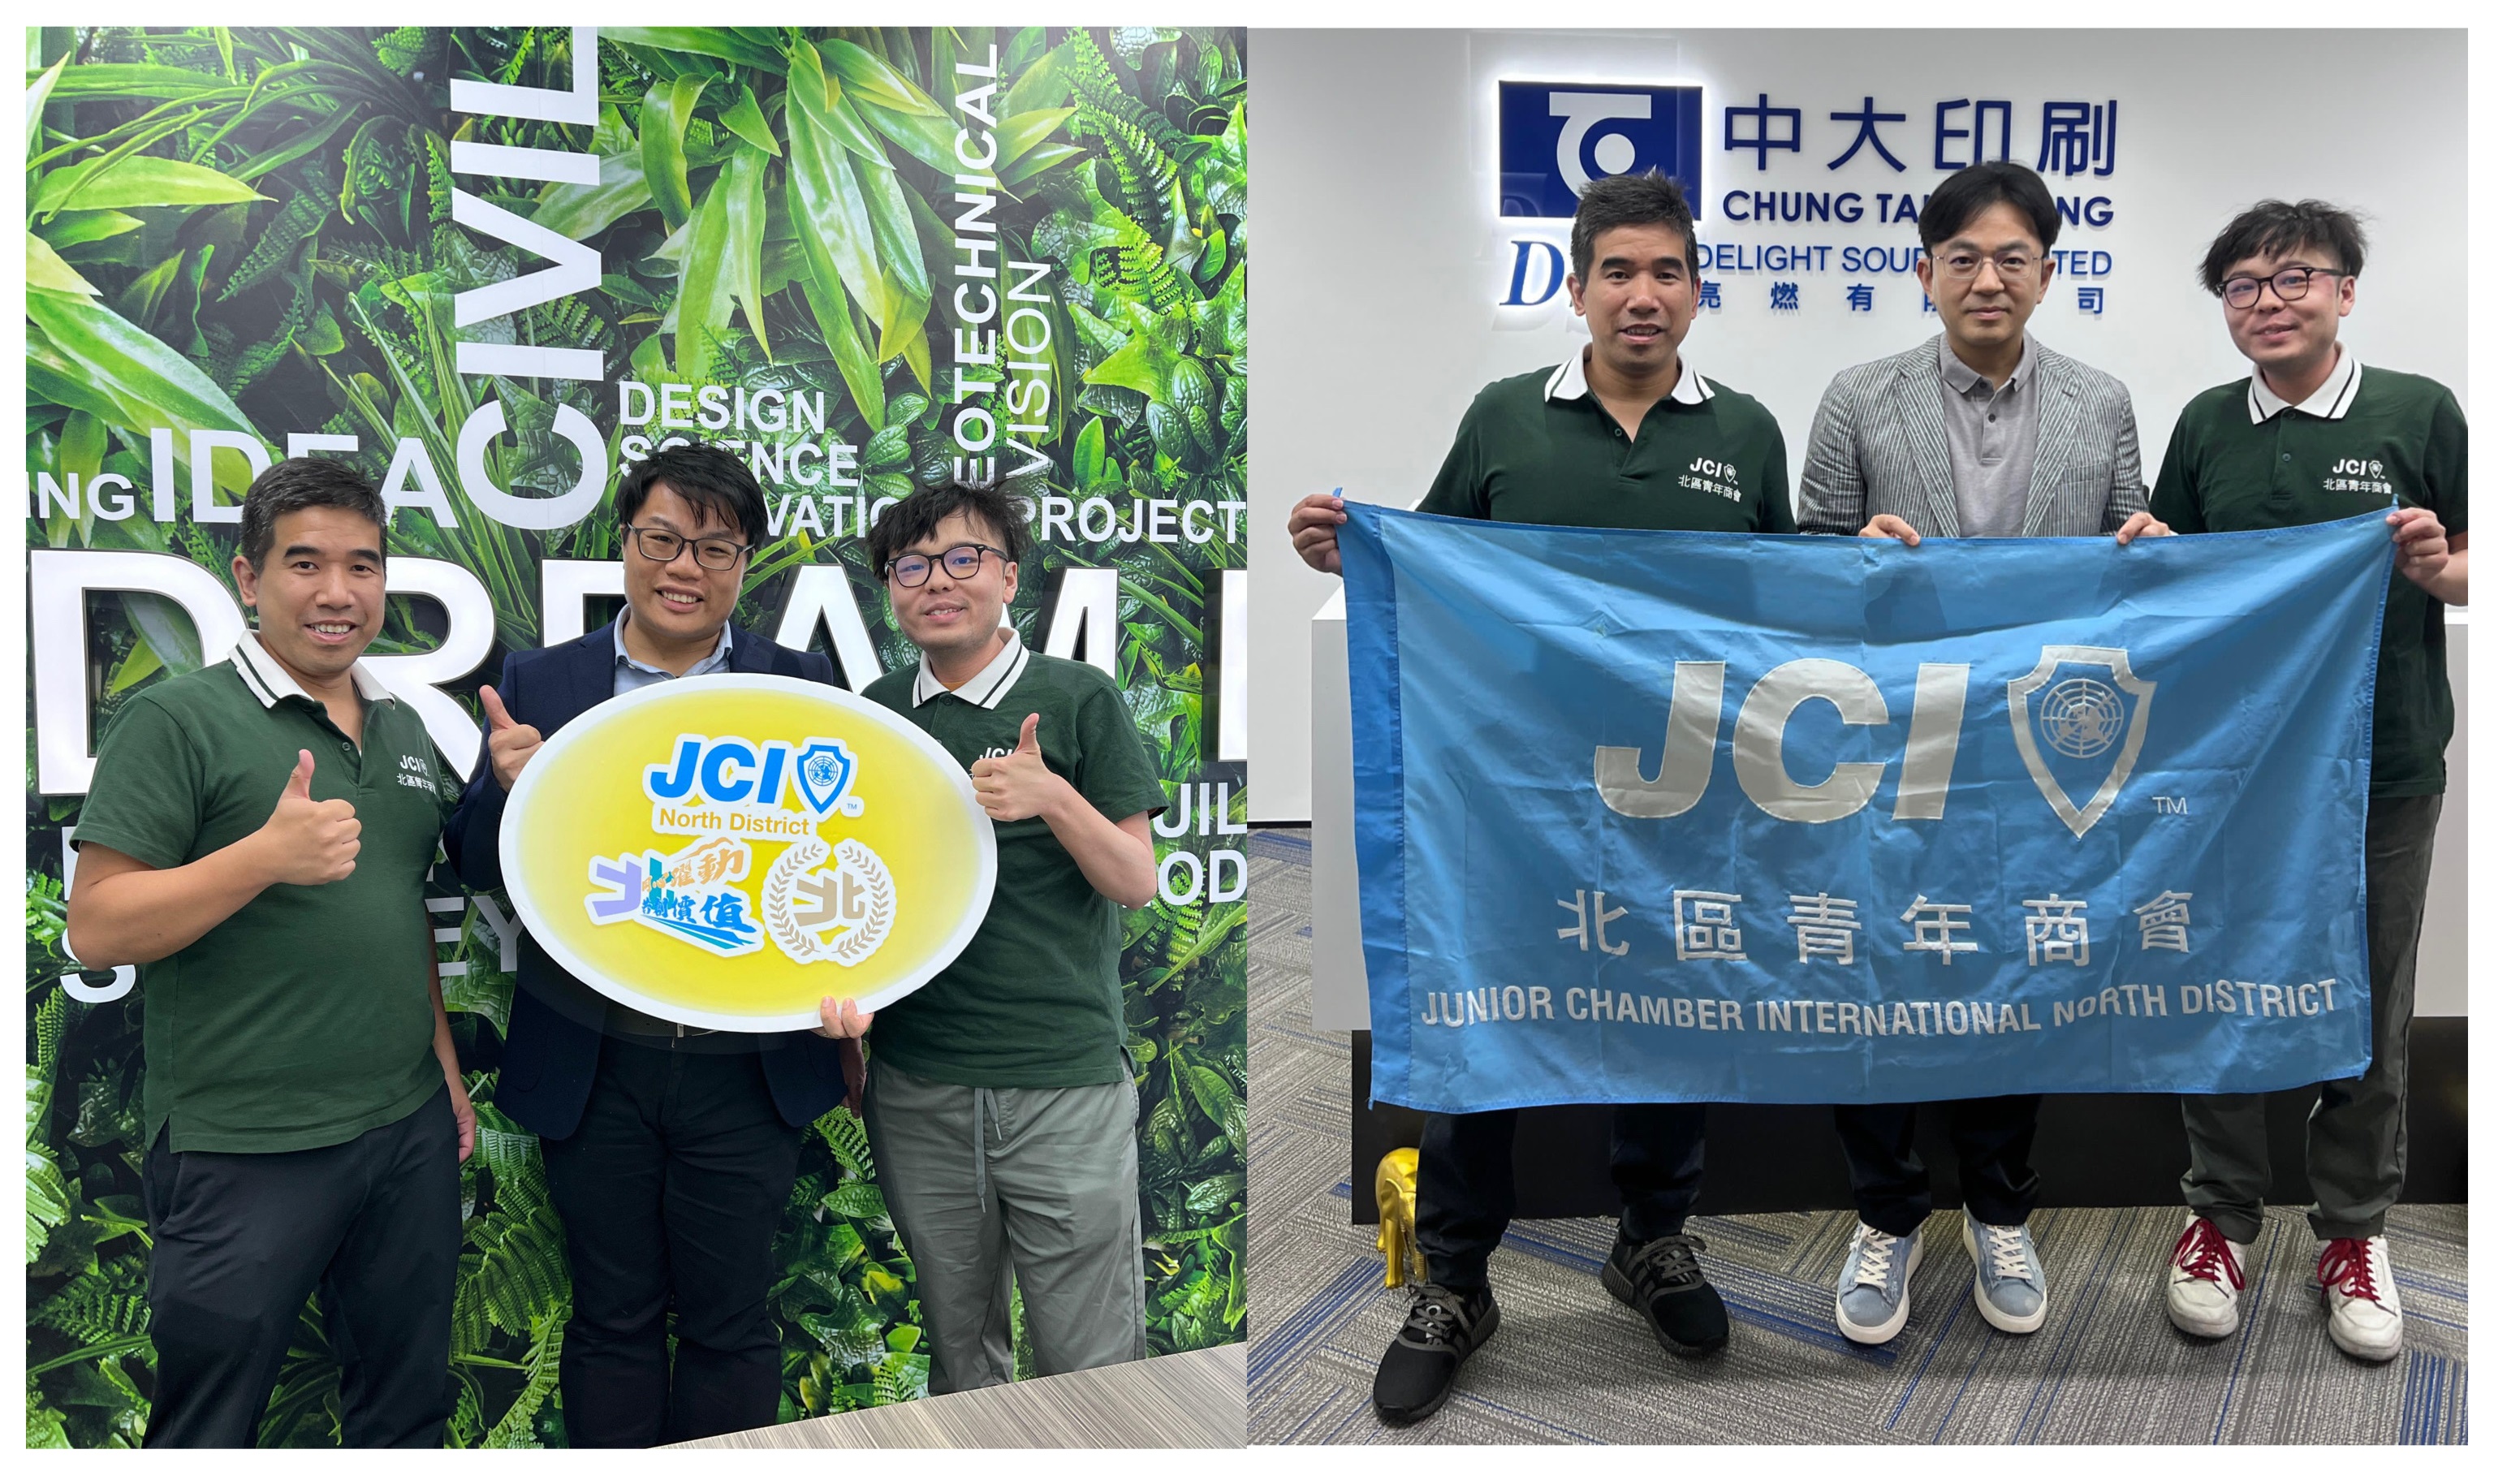 Mr. Lai Ming Kong, President of the JCI North District (left 1), Mr. Dixon Kwok, Managing Director of York Joint (Hong Kong) Limited (left 2), Mr. Jeffery Tsang, Assistant to the Chairman of Neway Group Holding Limited (right).